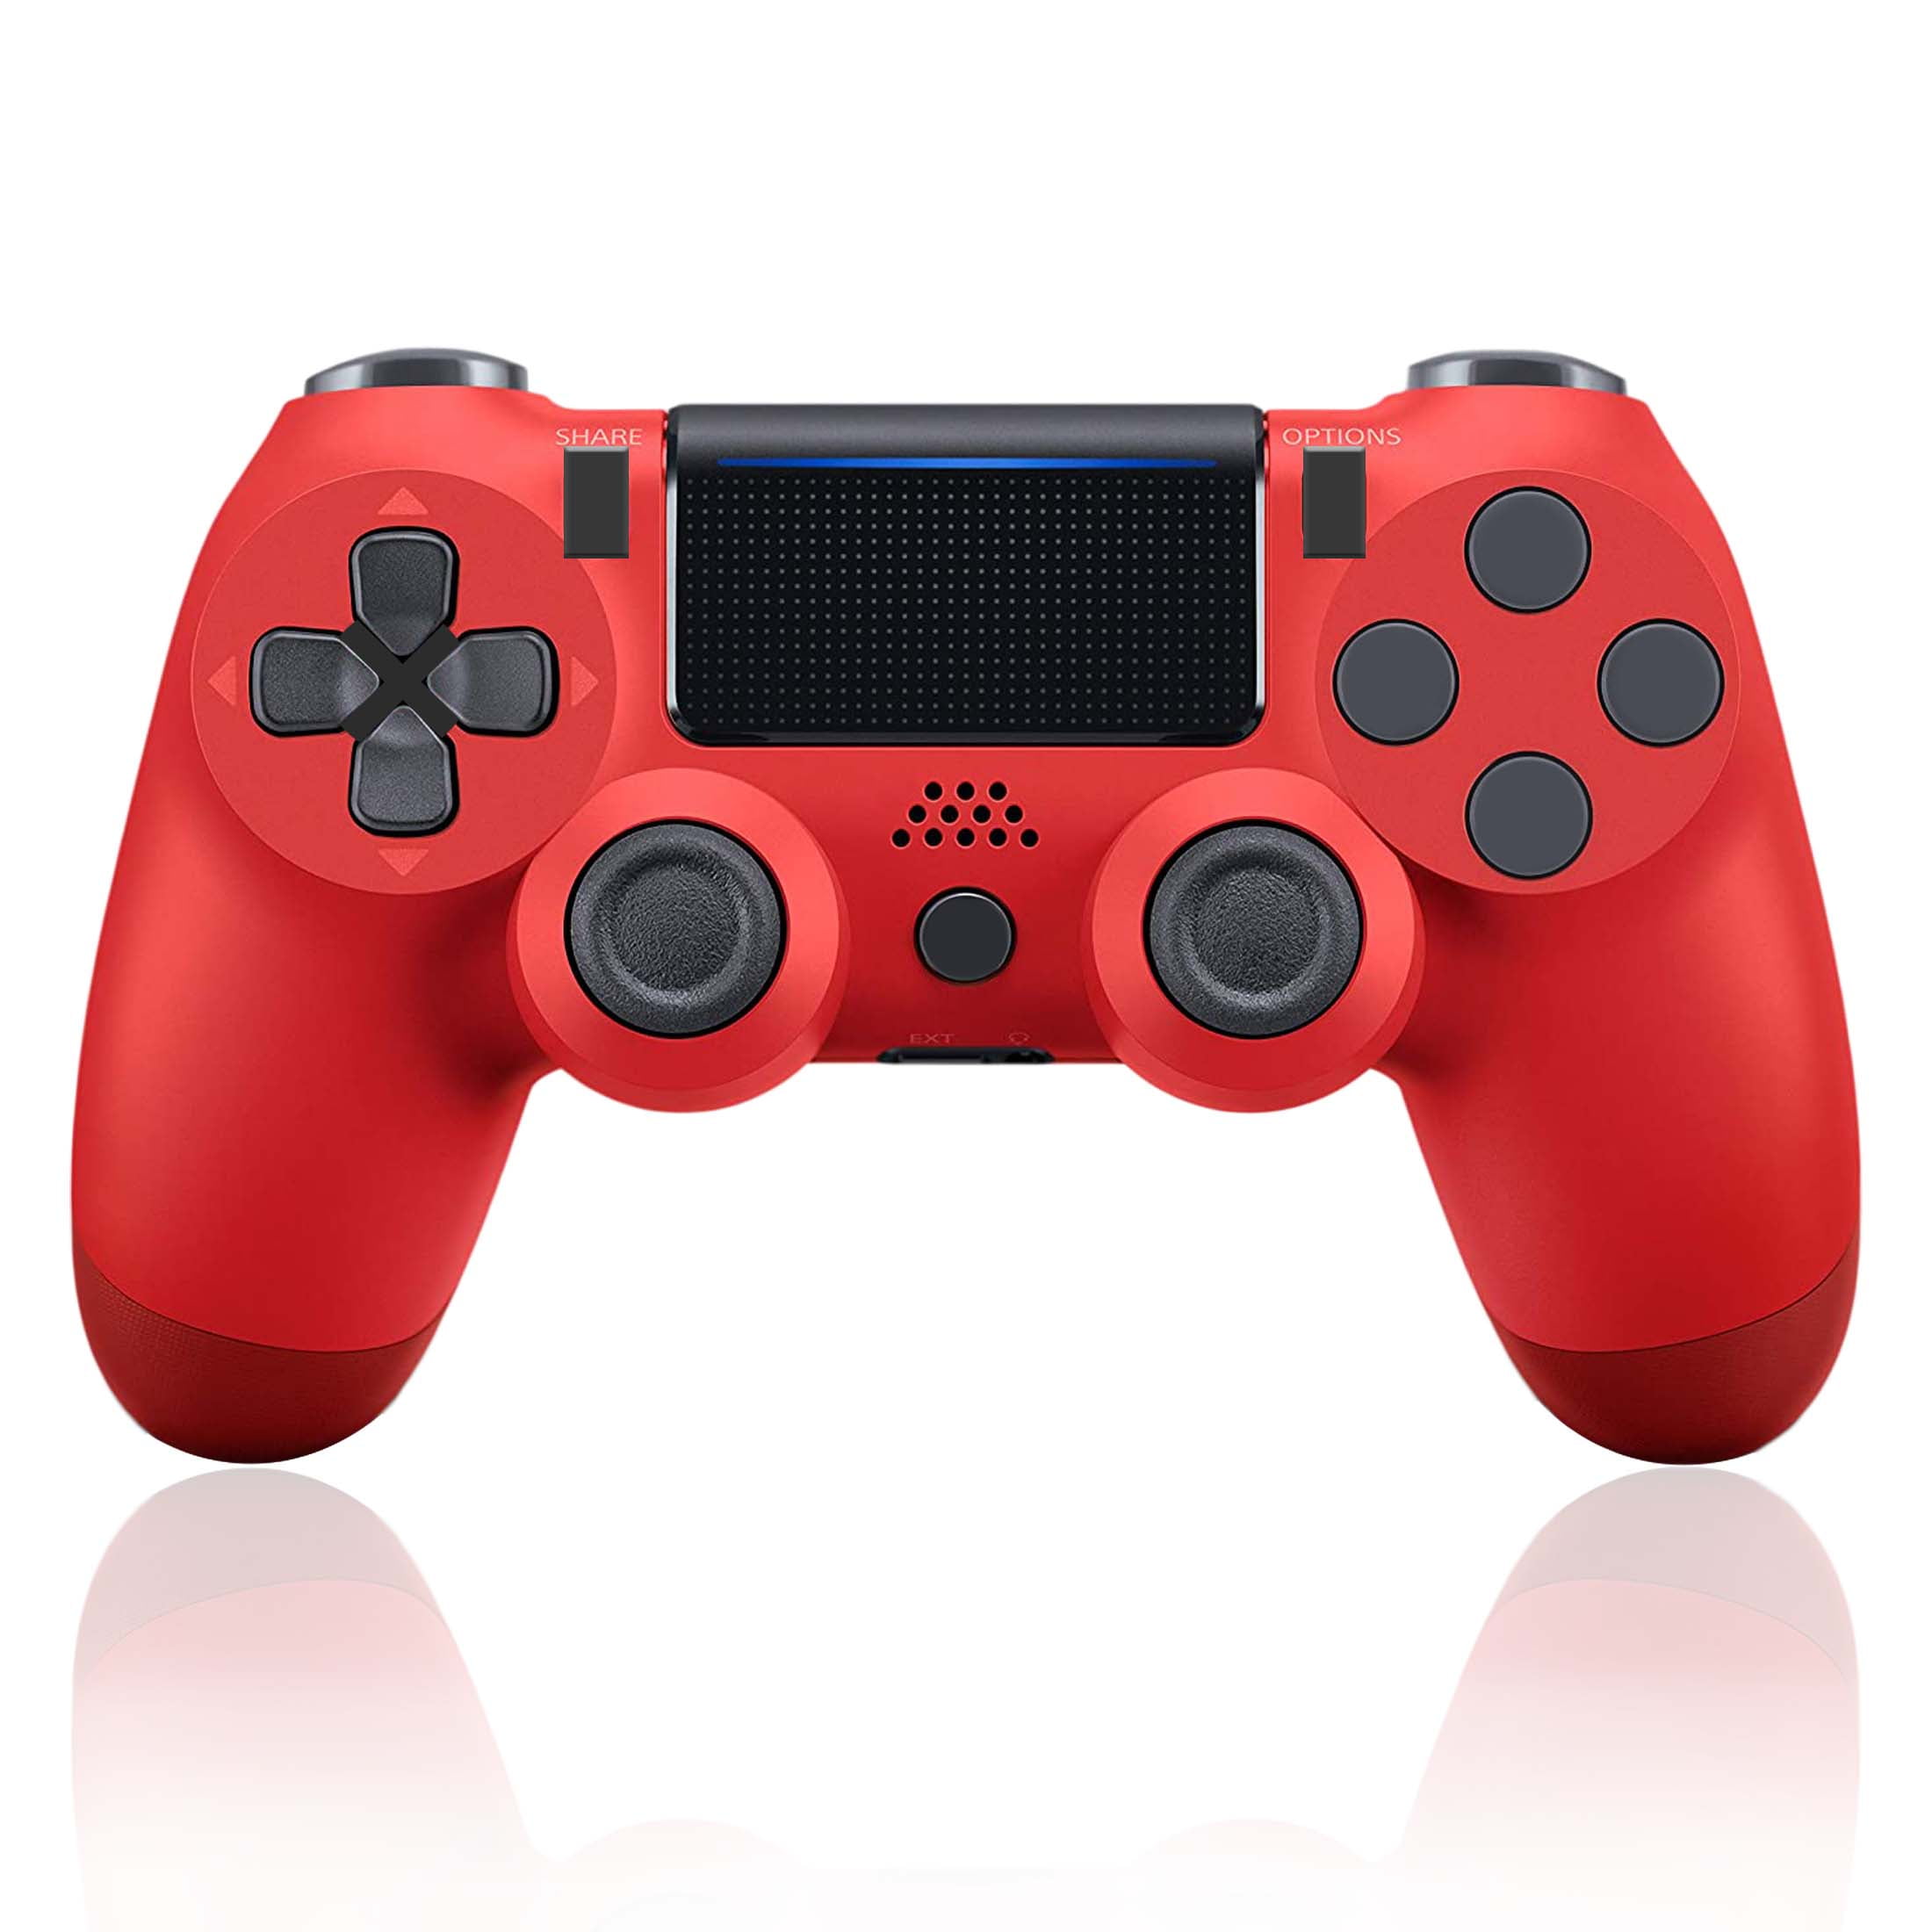 Agnes Gray brug Perth Blackborough Wired PS4 Controller Compatible for Play-station 4/pro/Slim/PC/Laptop,  6.5ft Cable Length USB Gamepad Wired with Colored LED Indicator, Double  Vibration and Anti Slip Grip(Red) - Walmart.com